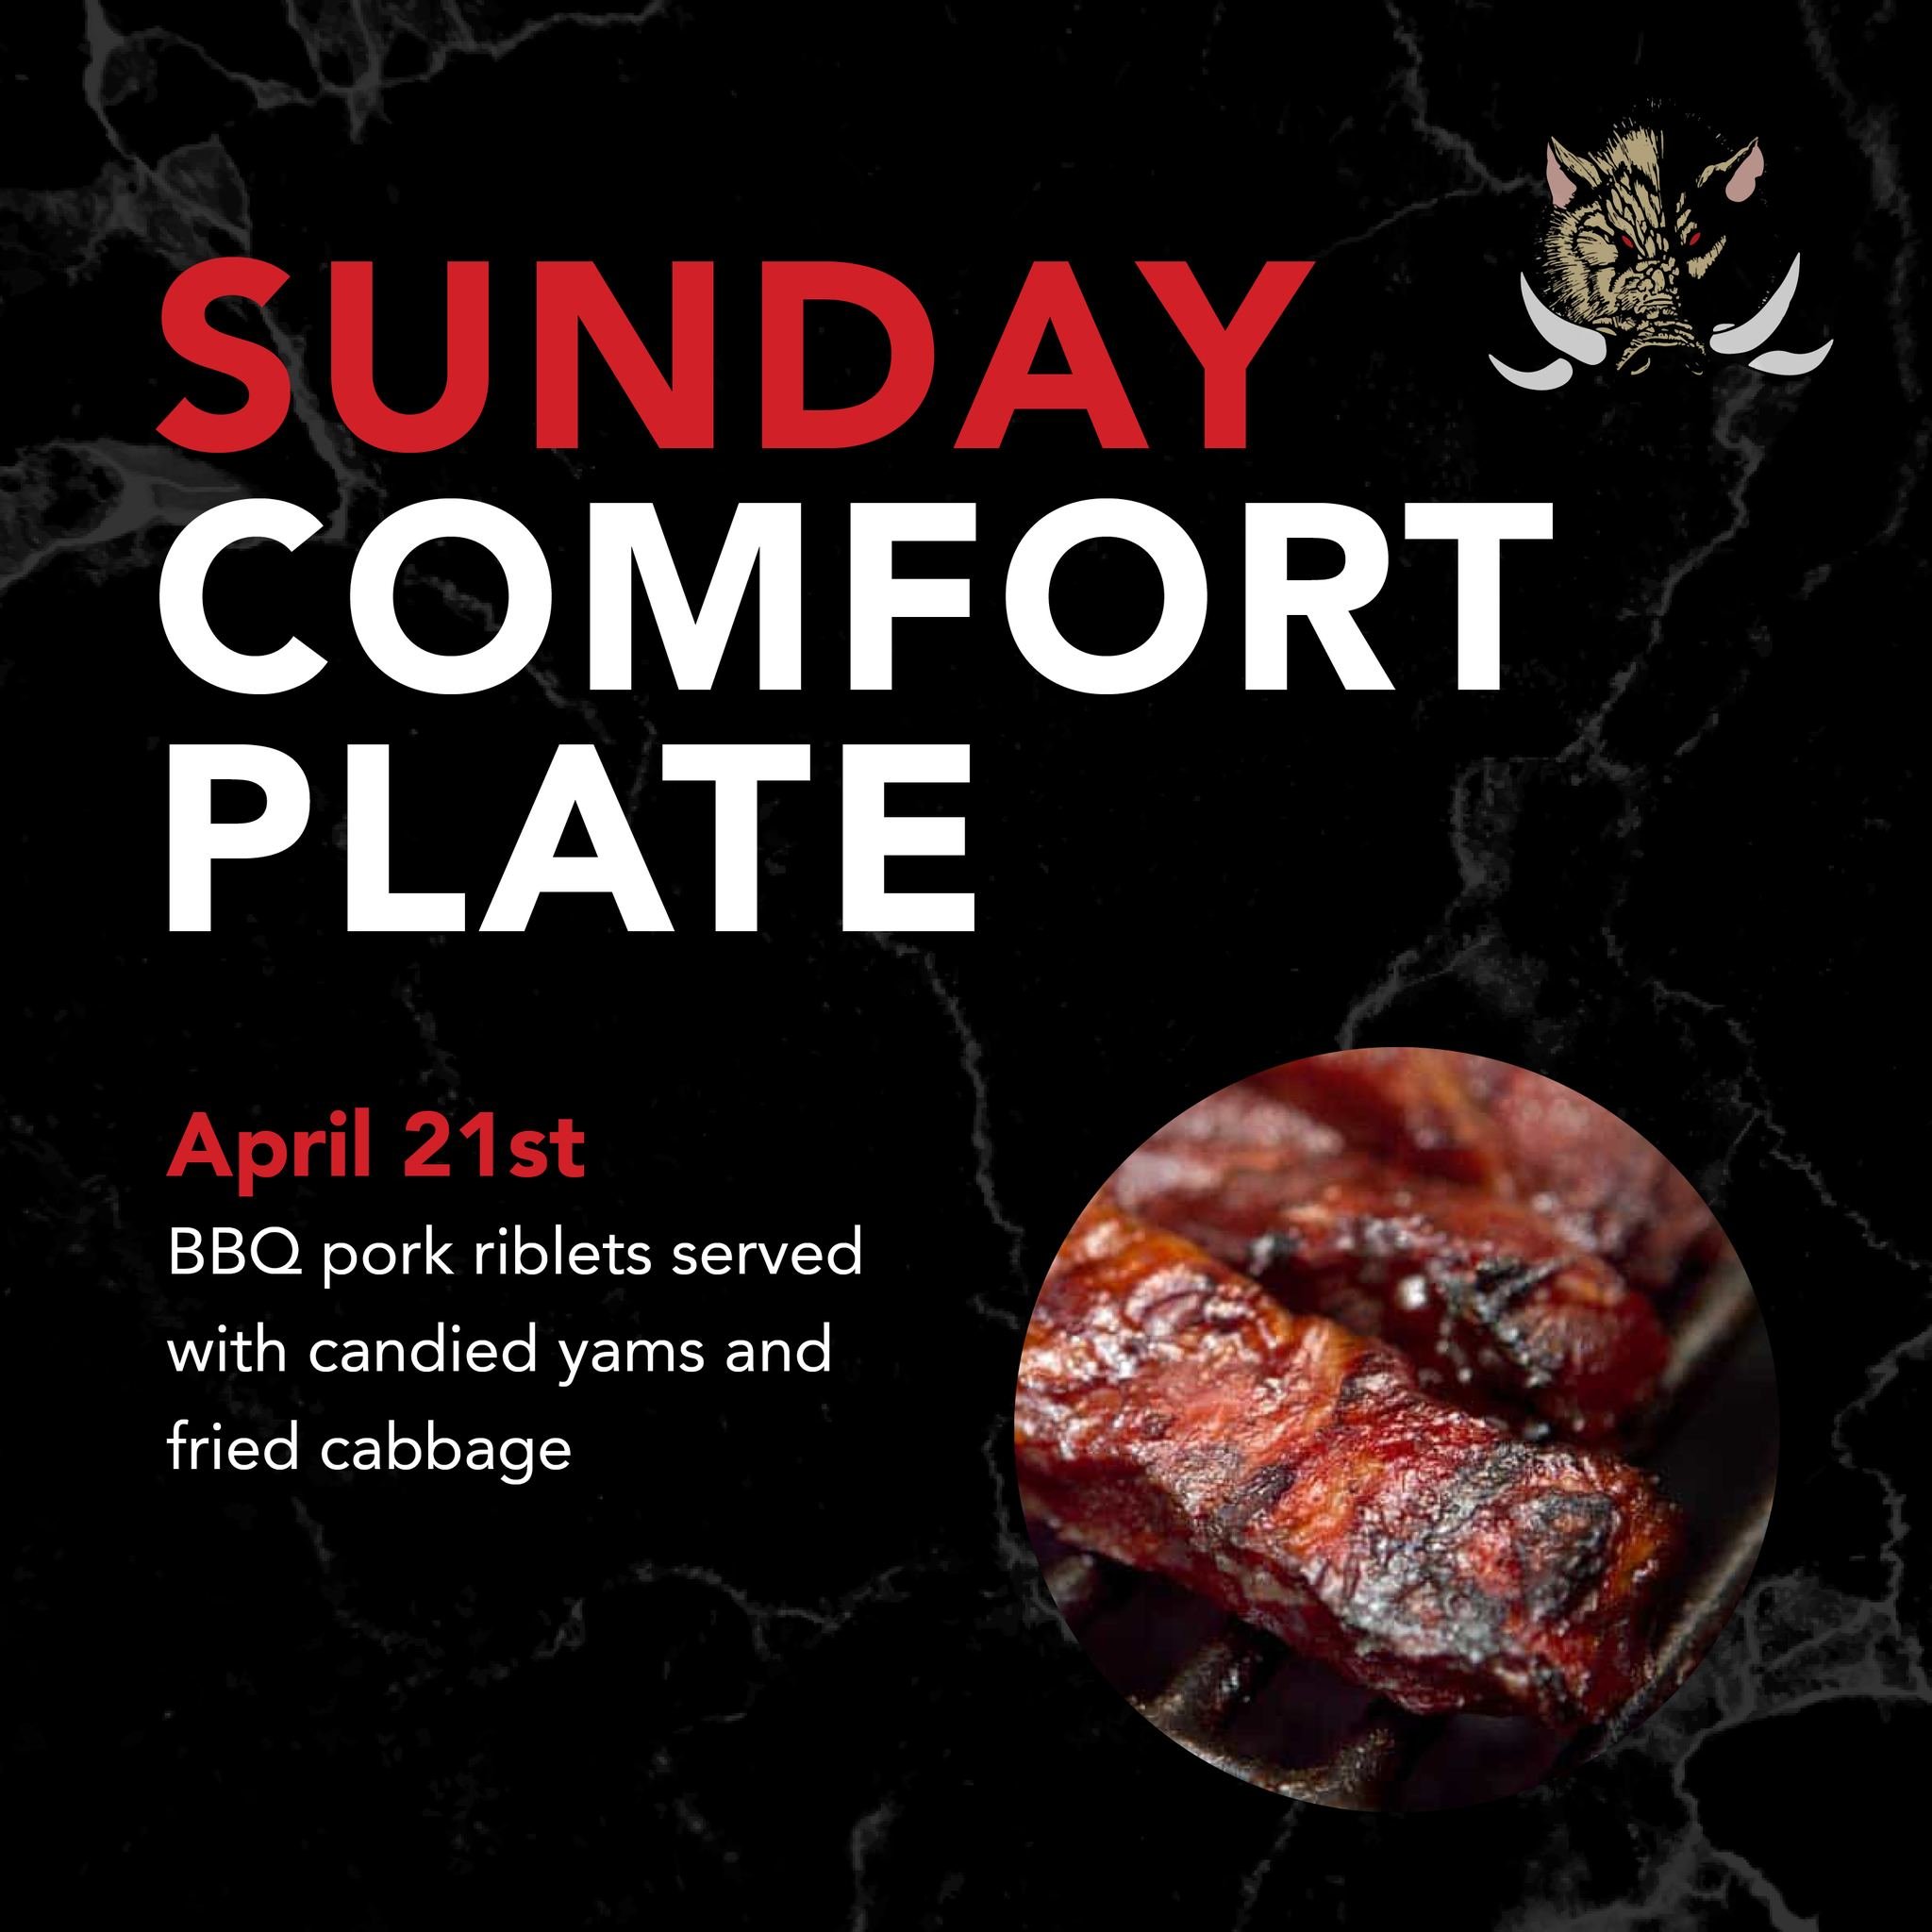 Craving comfort food? Join us this Sunday for our Sunday Comfort Special featuring BBQ pork riblets, candied yams, and fried cabbage!

#madboarnc #exit385 #tastethemadness #sundaycomfortspecial #bbq #pork